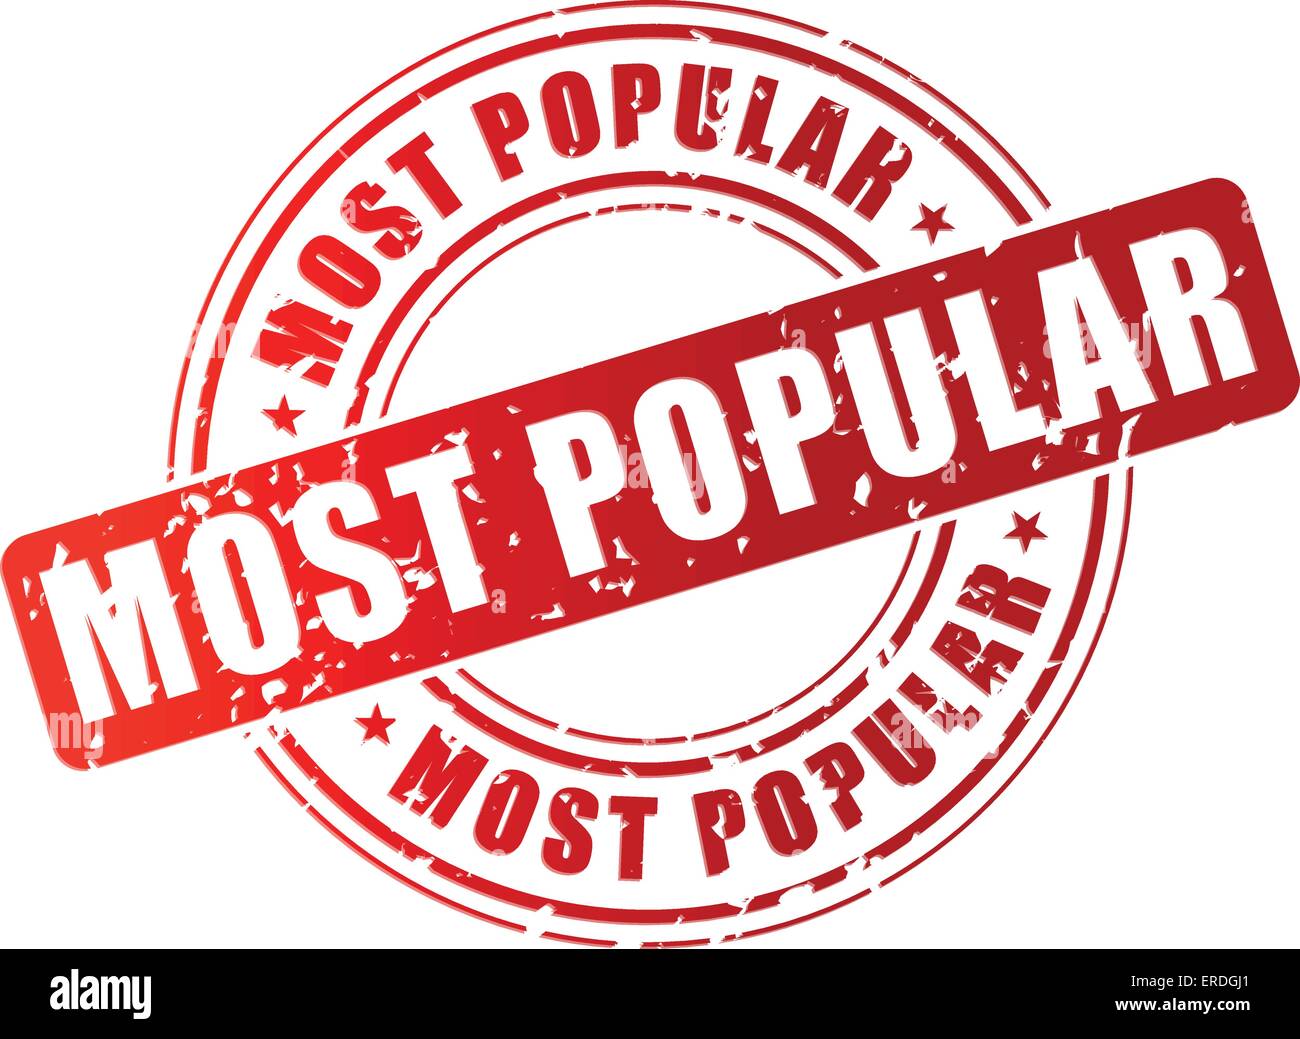 Vector illustration of most popular red stamp on white background Stock Vector